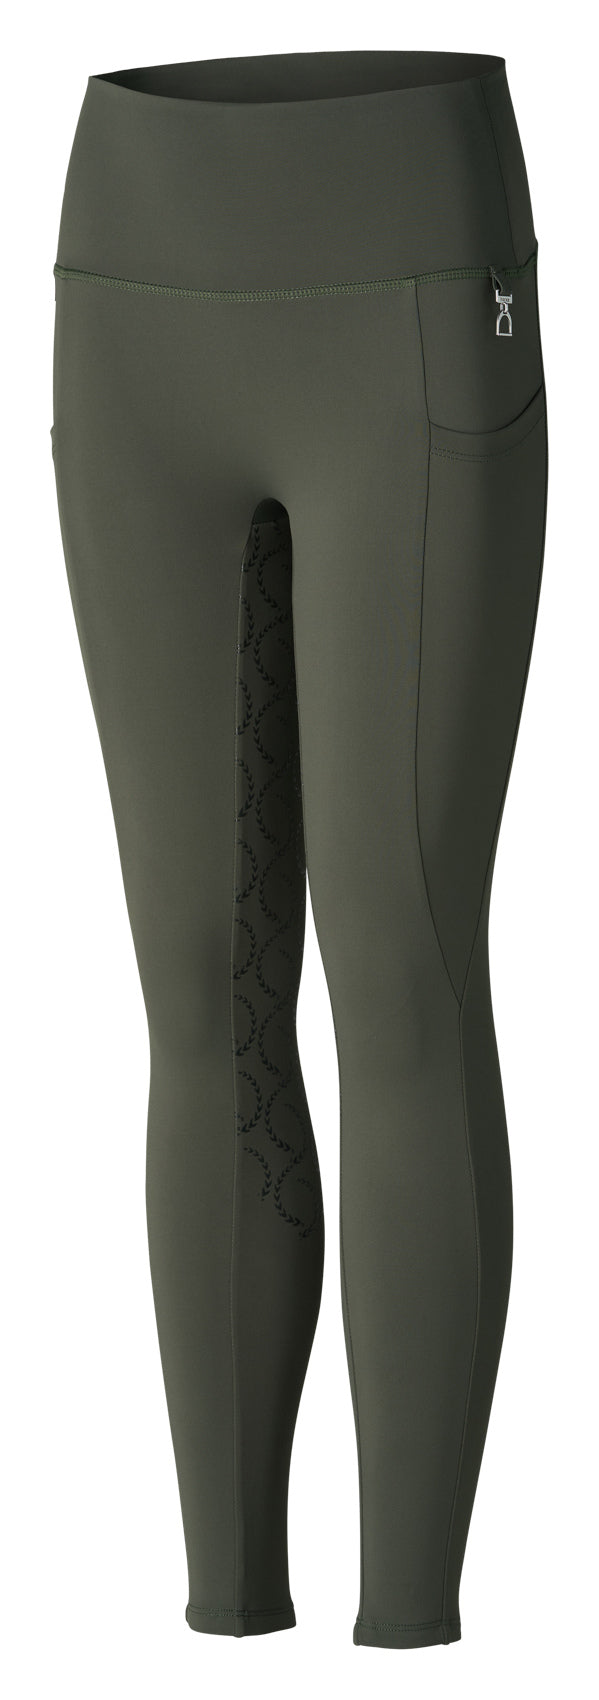 Horze Gillian Kids Silicone Full Seat Tights